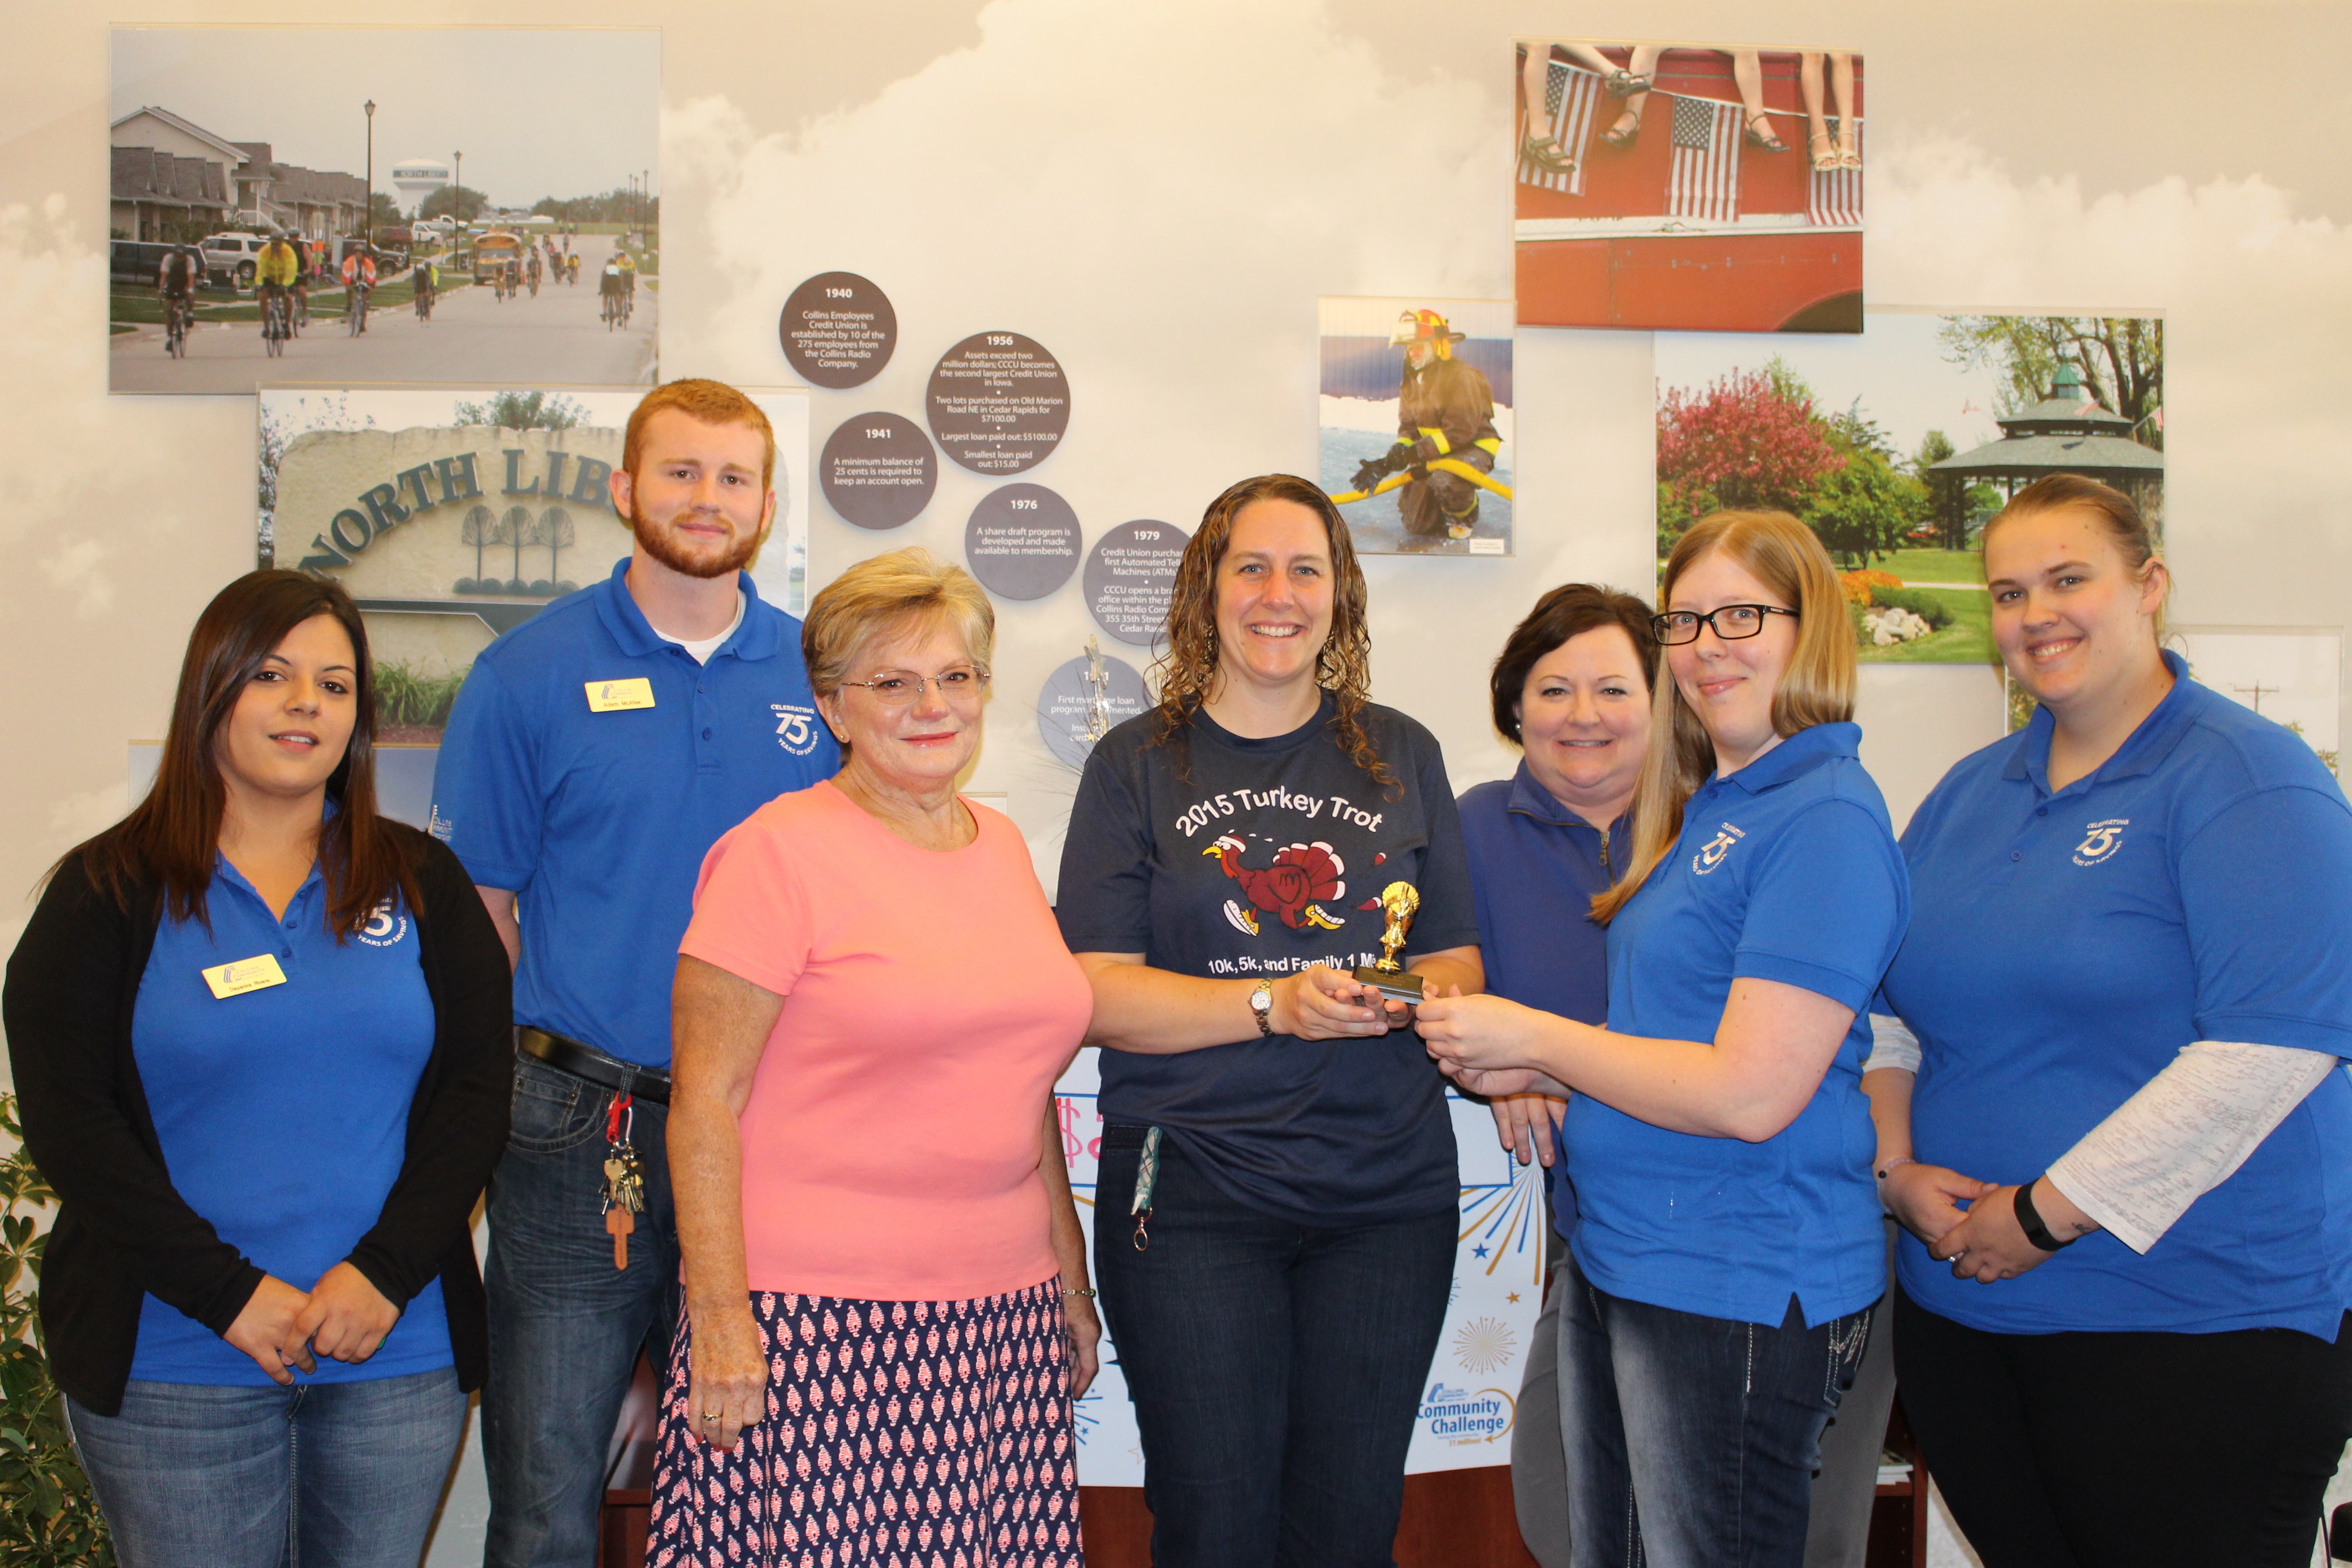 Collins Community CU North Liberty Branch Receives Traveling Turkey Trophy for the North Liberty Community Pantry